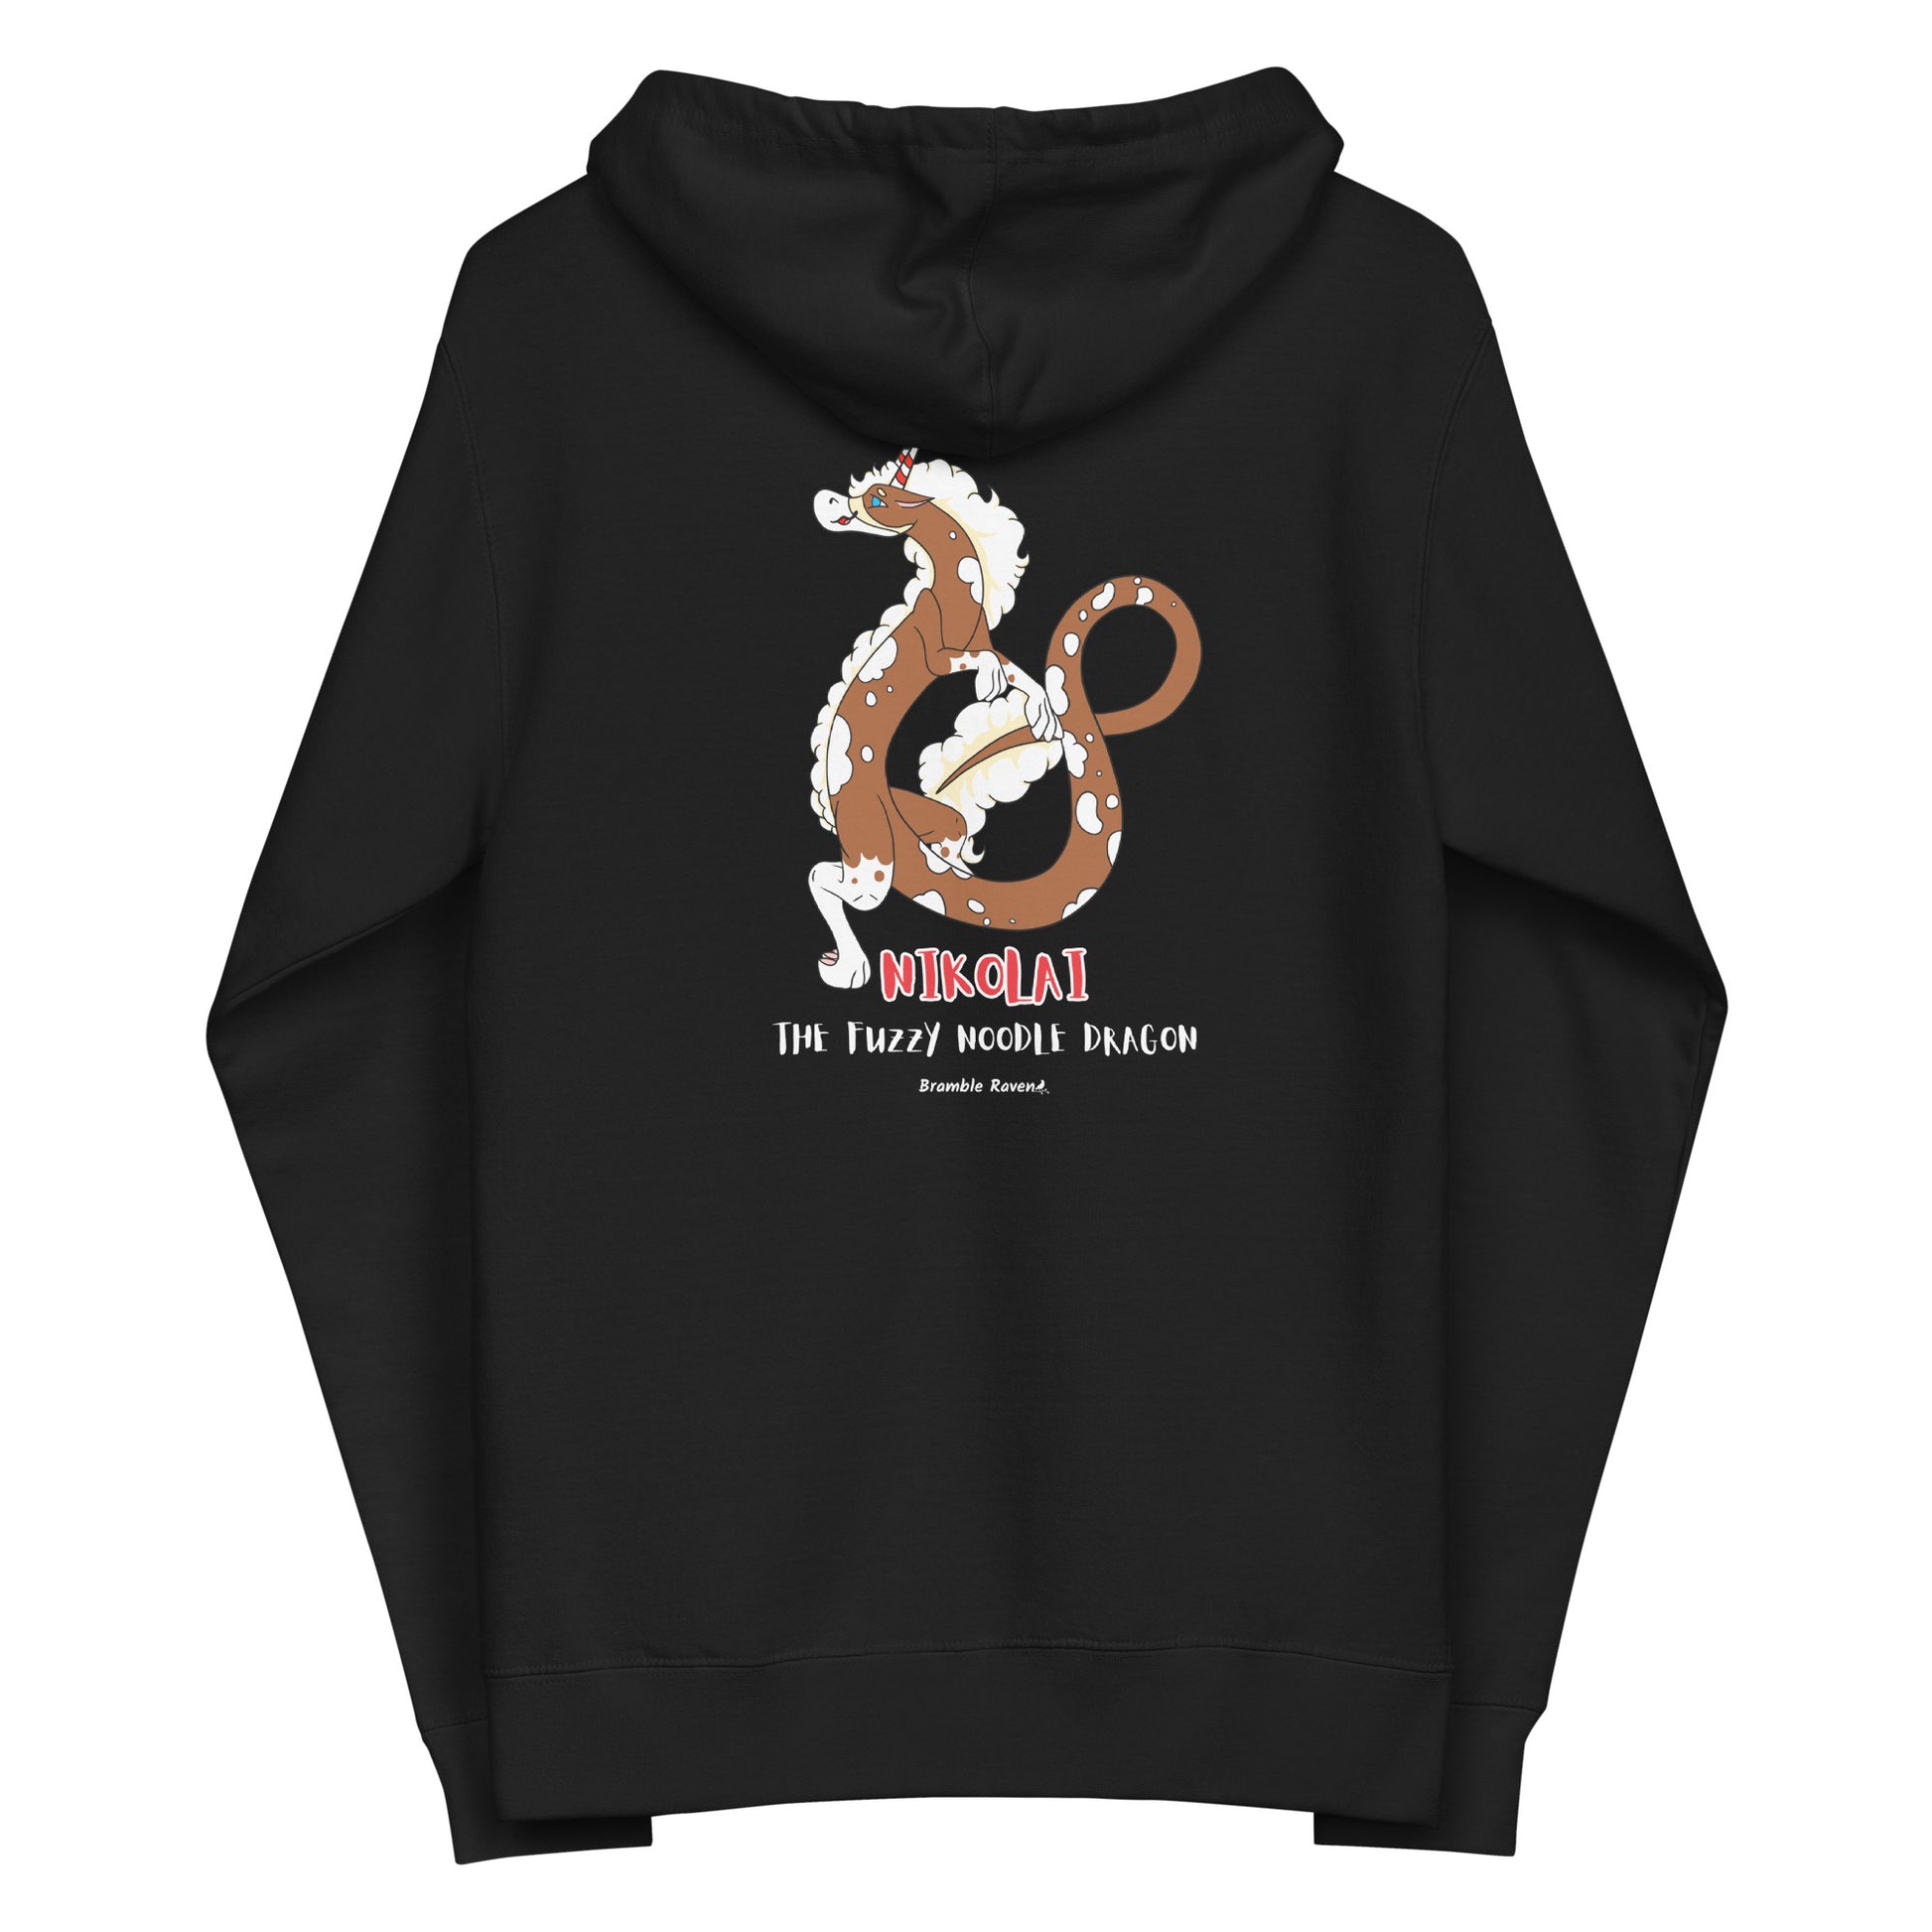 Black colored unisex fleece zip-up hoodie. Features a back design of Nikolai the root beer float fuzzy noodle dragon.